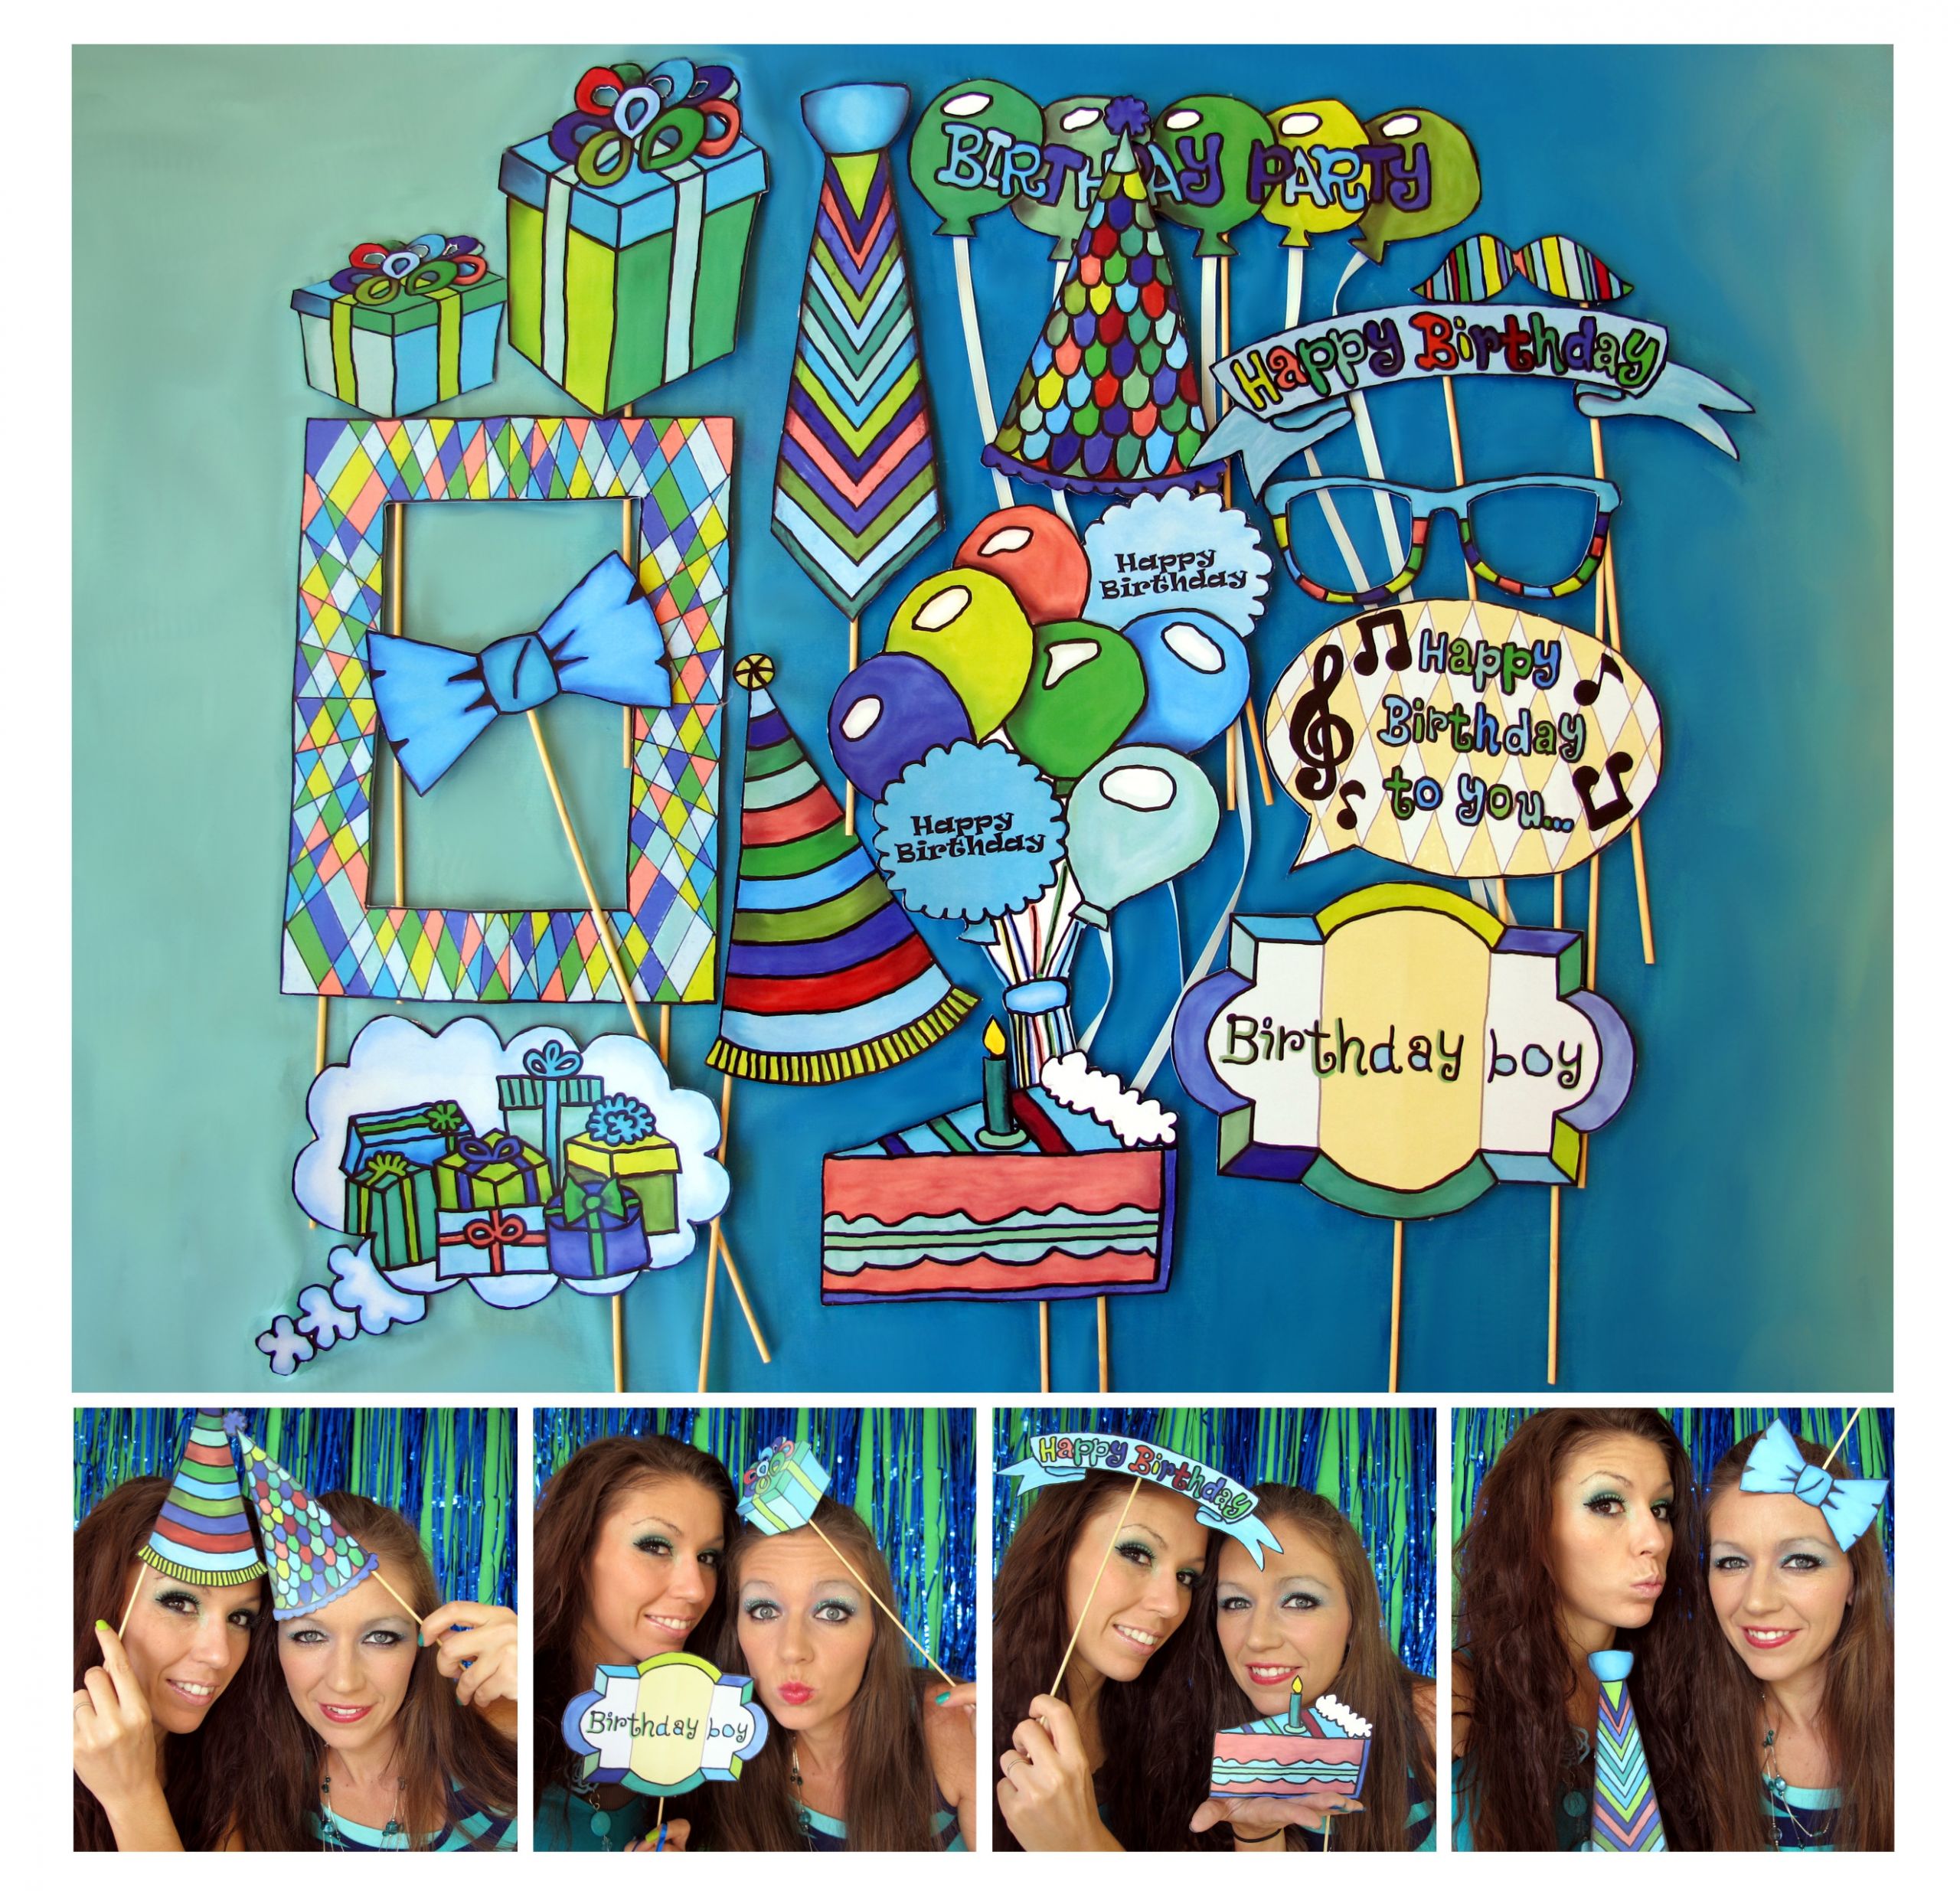 Photo Booth Ideas For Birthday Party
 boy birthday photo booth props in blue green and brown